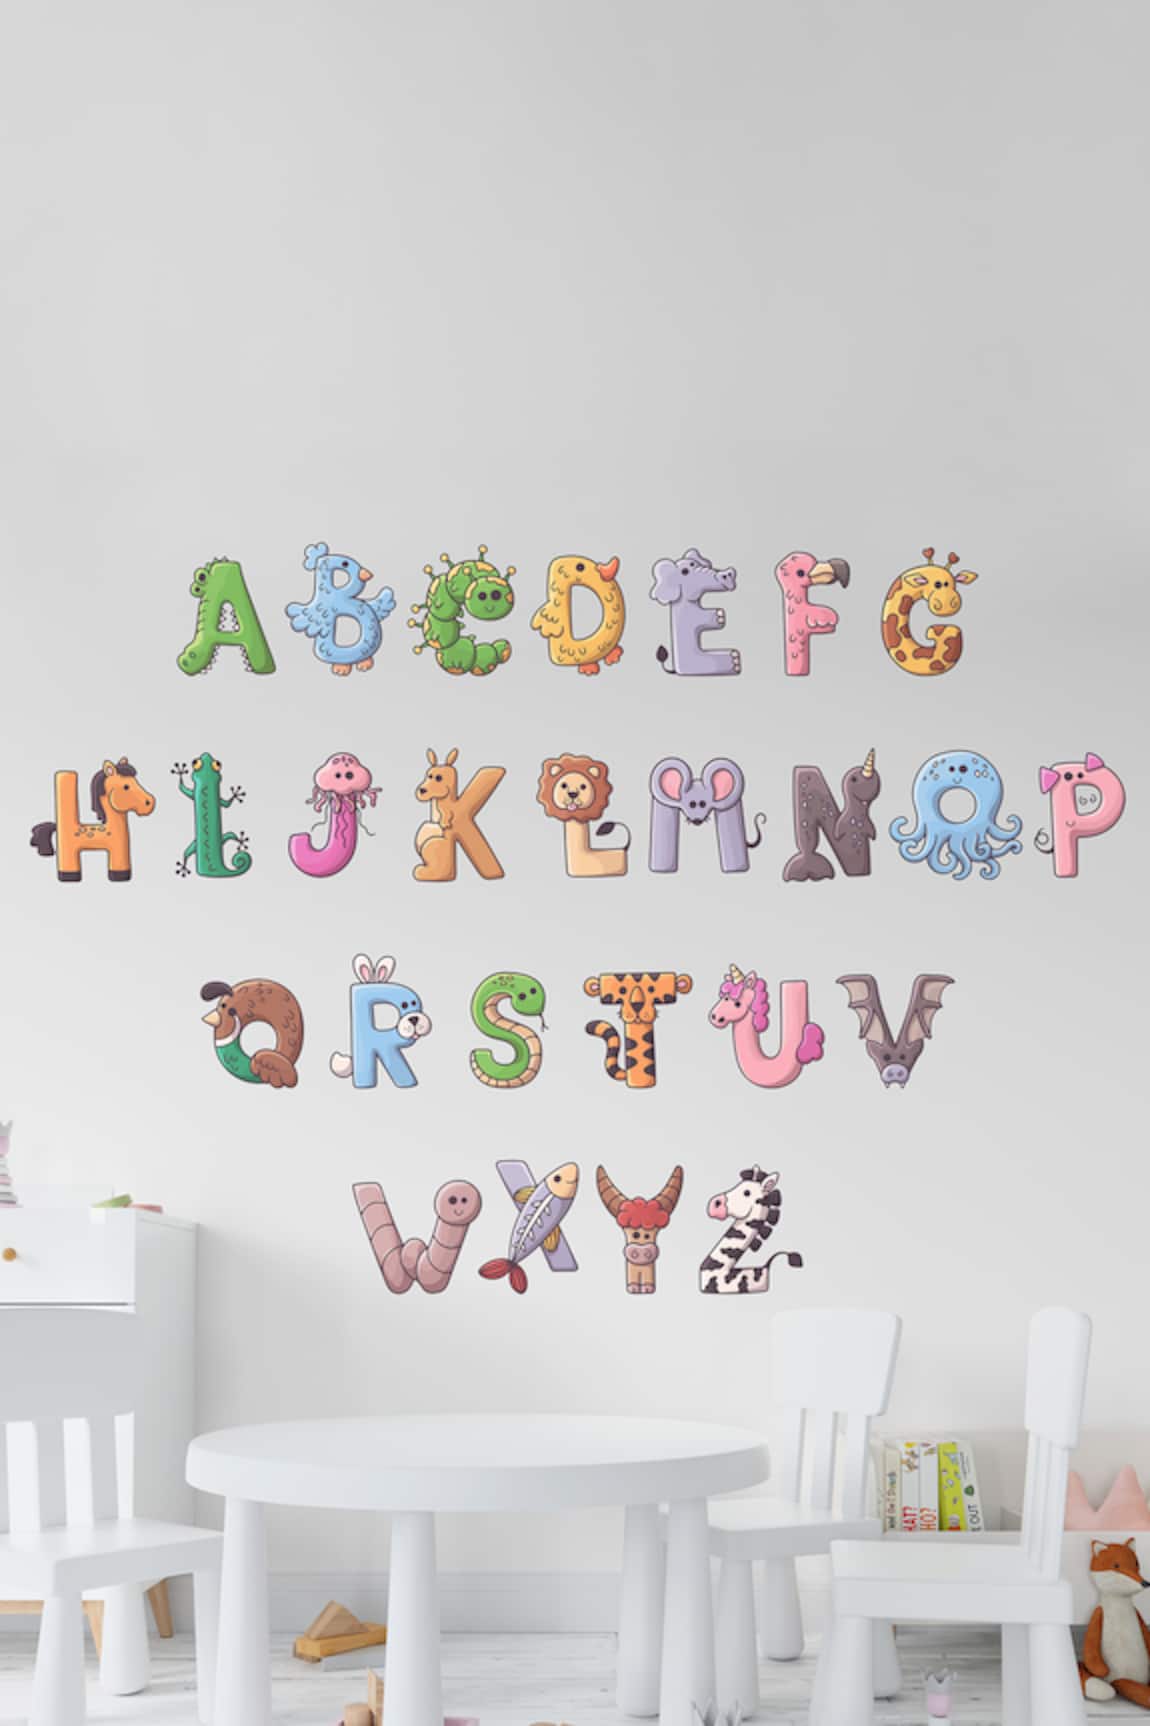 My Kids Wall Animal Illustrated Alphabets Wall Stickers Set